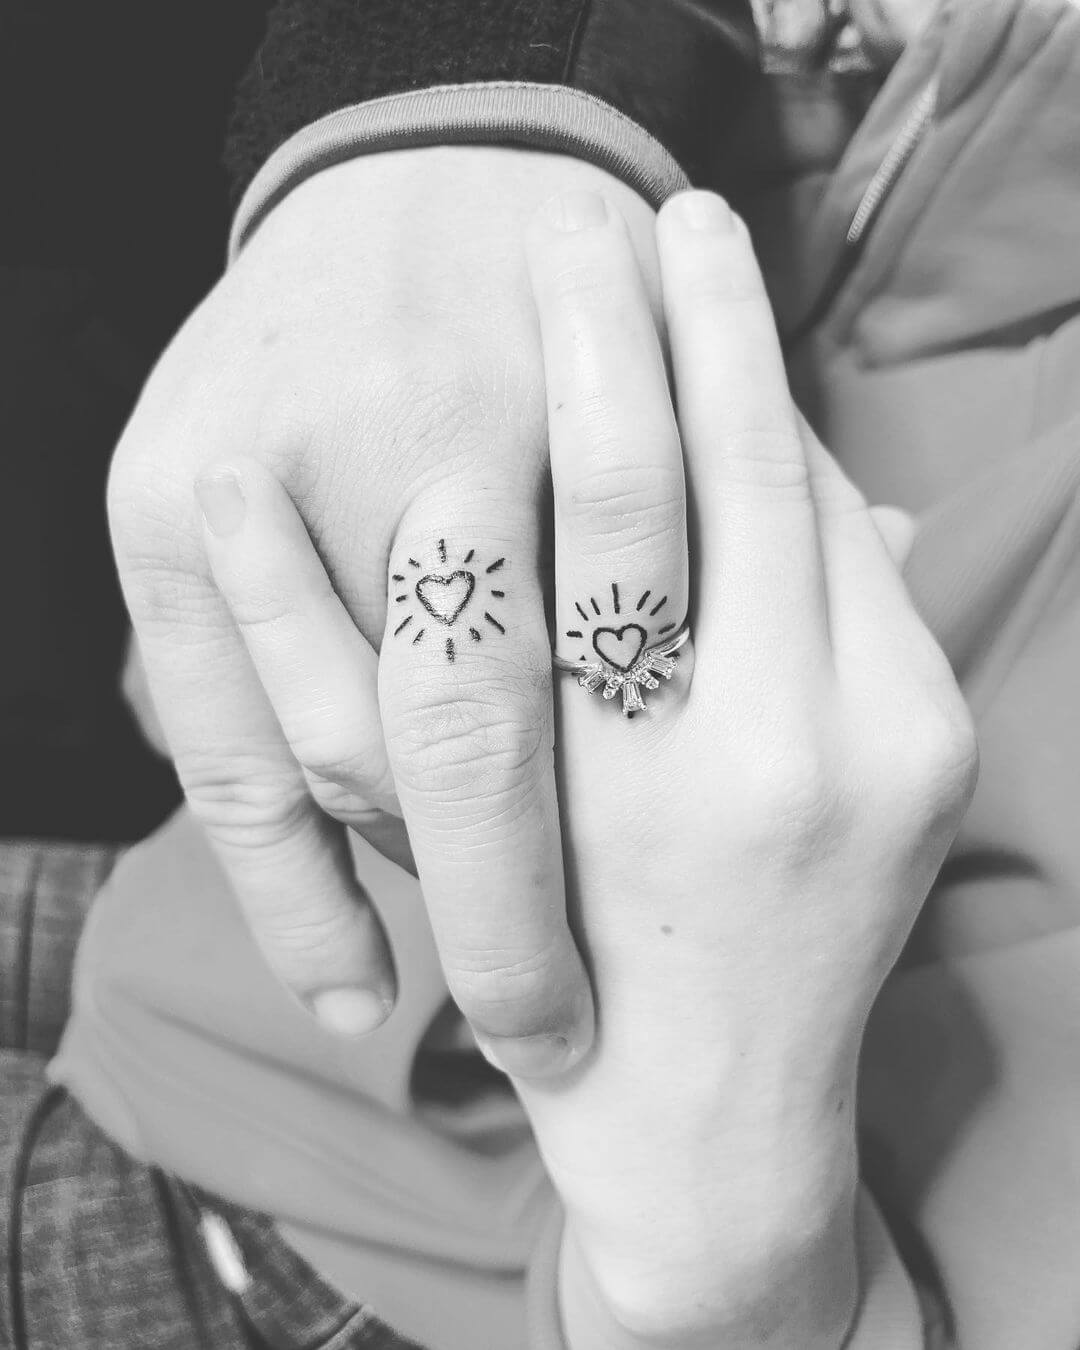 Small Tattoo Ideas for Hands — Tiny Finger Tattoo Designs